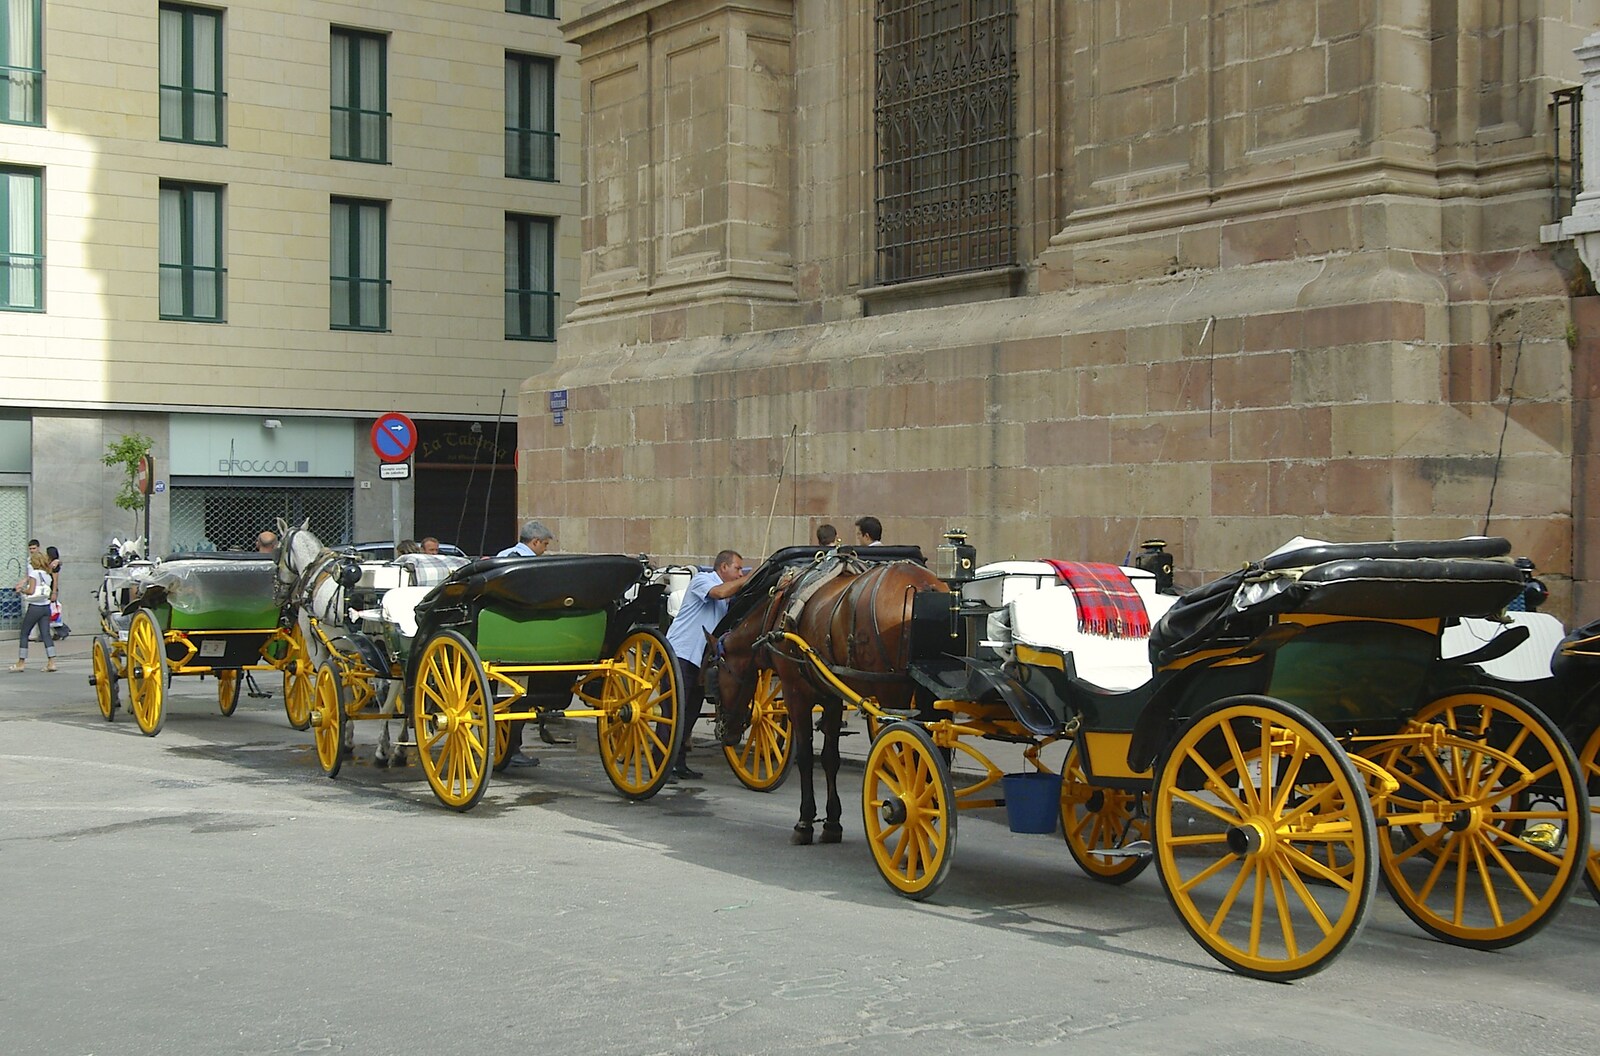 Horses and carts wait for tourists from Working at Telefónica, Malaga, Spain - 6th June 2006